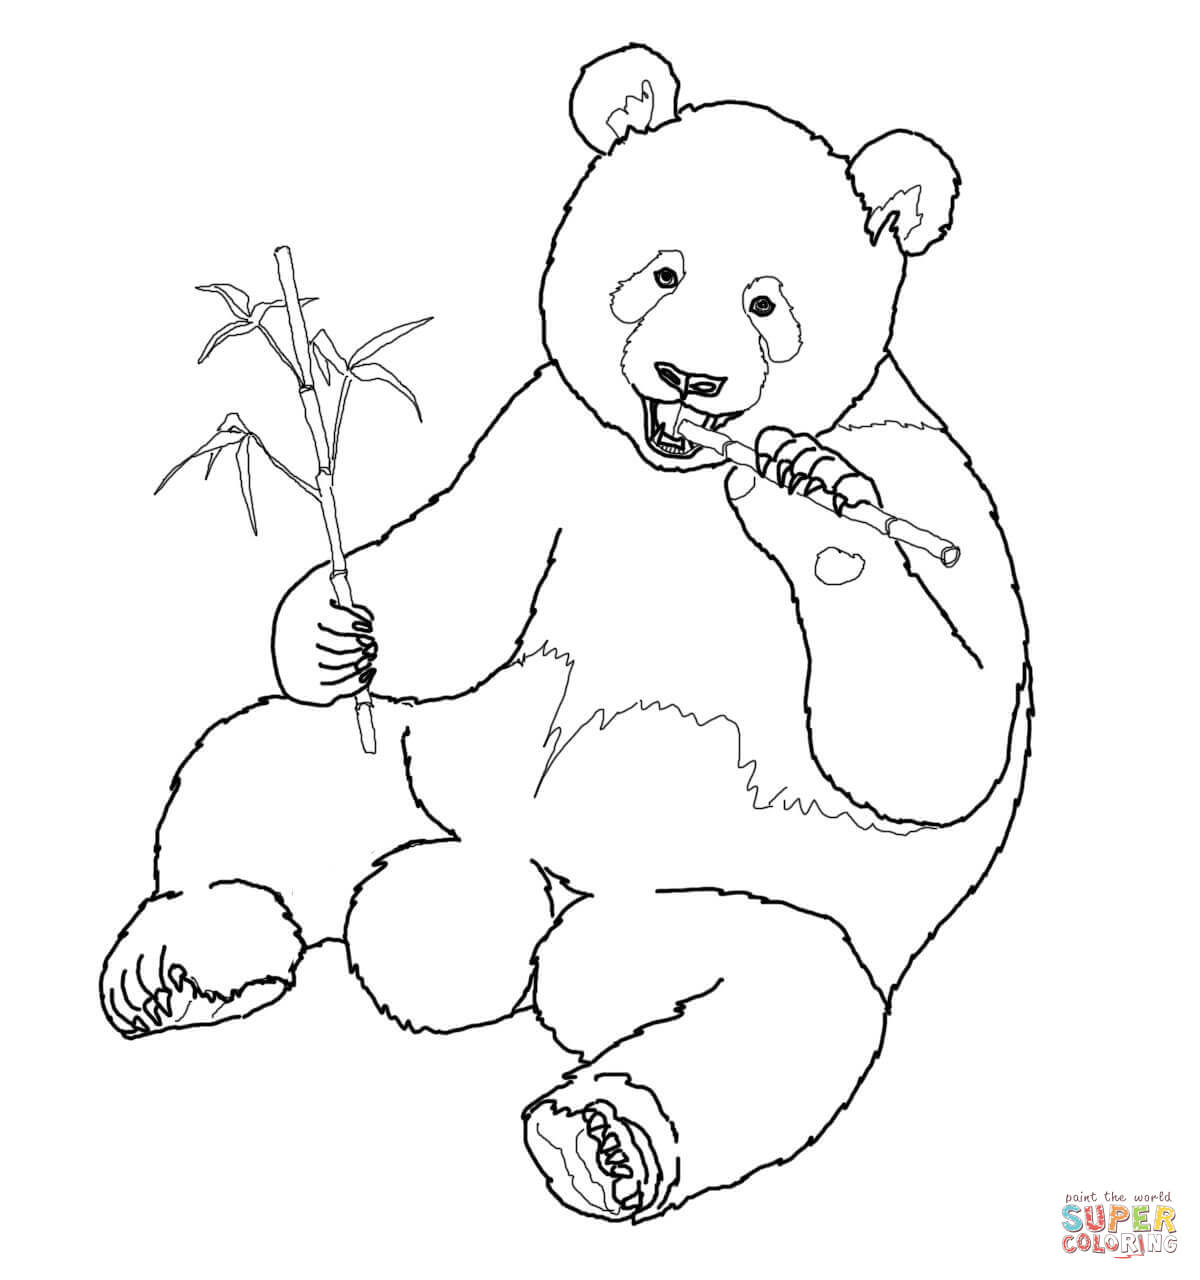 Giant Panda Eats Bamboo coloring page | Free Printable Coloring Pages